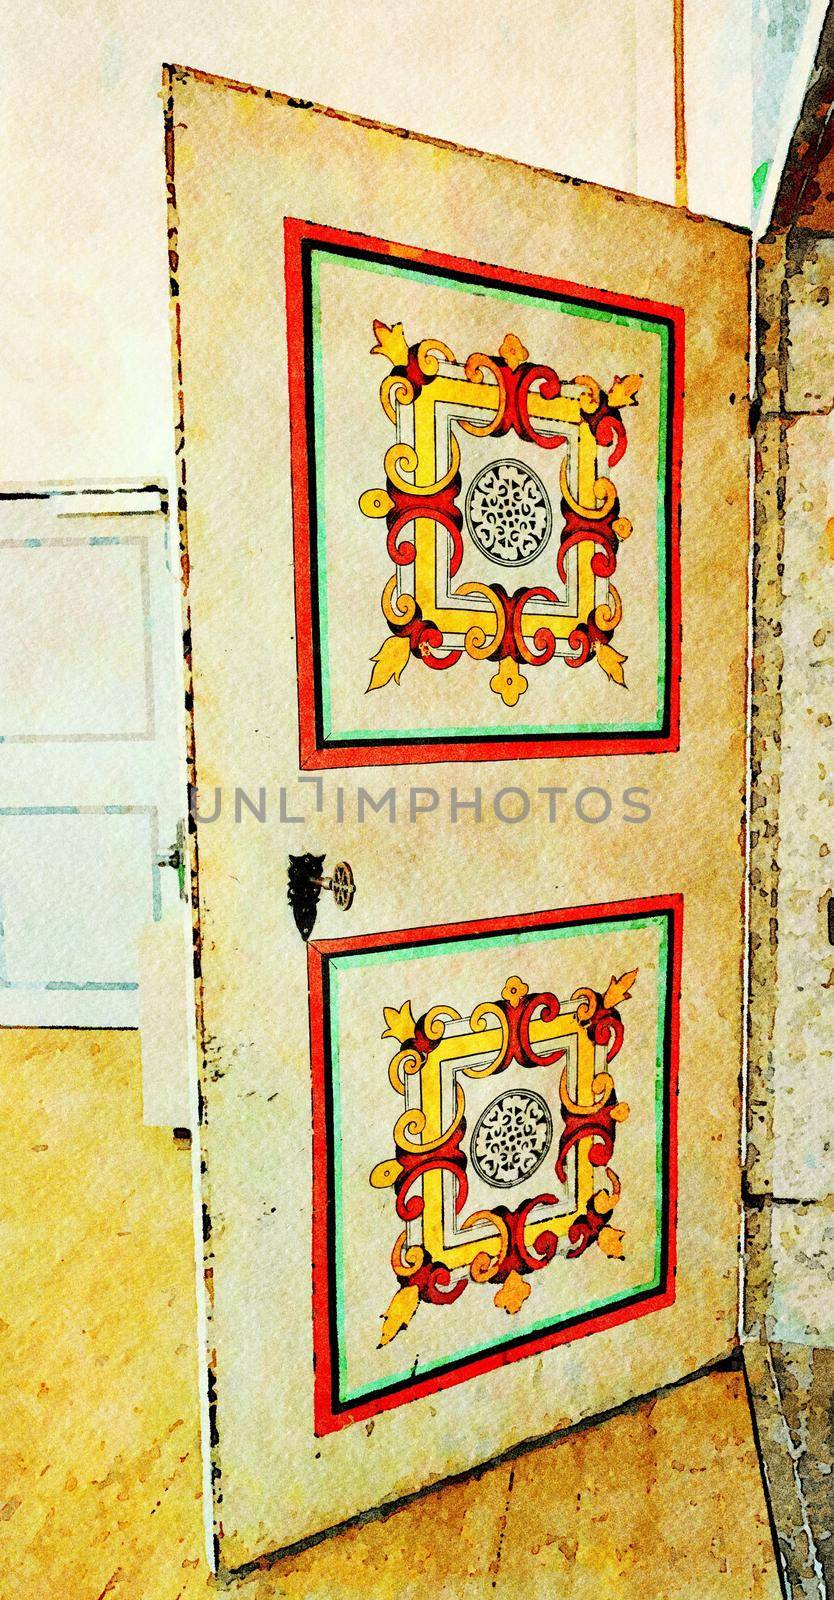 Digital color watercolor style representing an ancient door in a building dating back to the sixteenth century